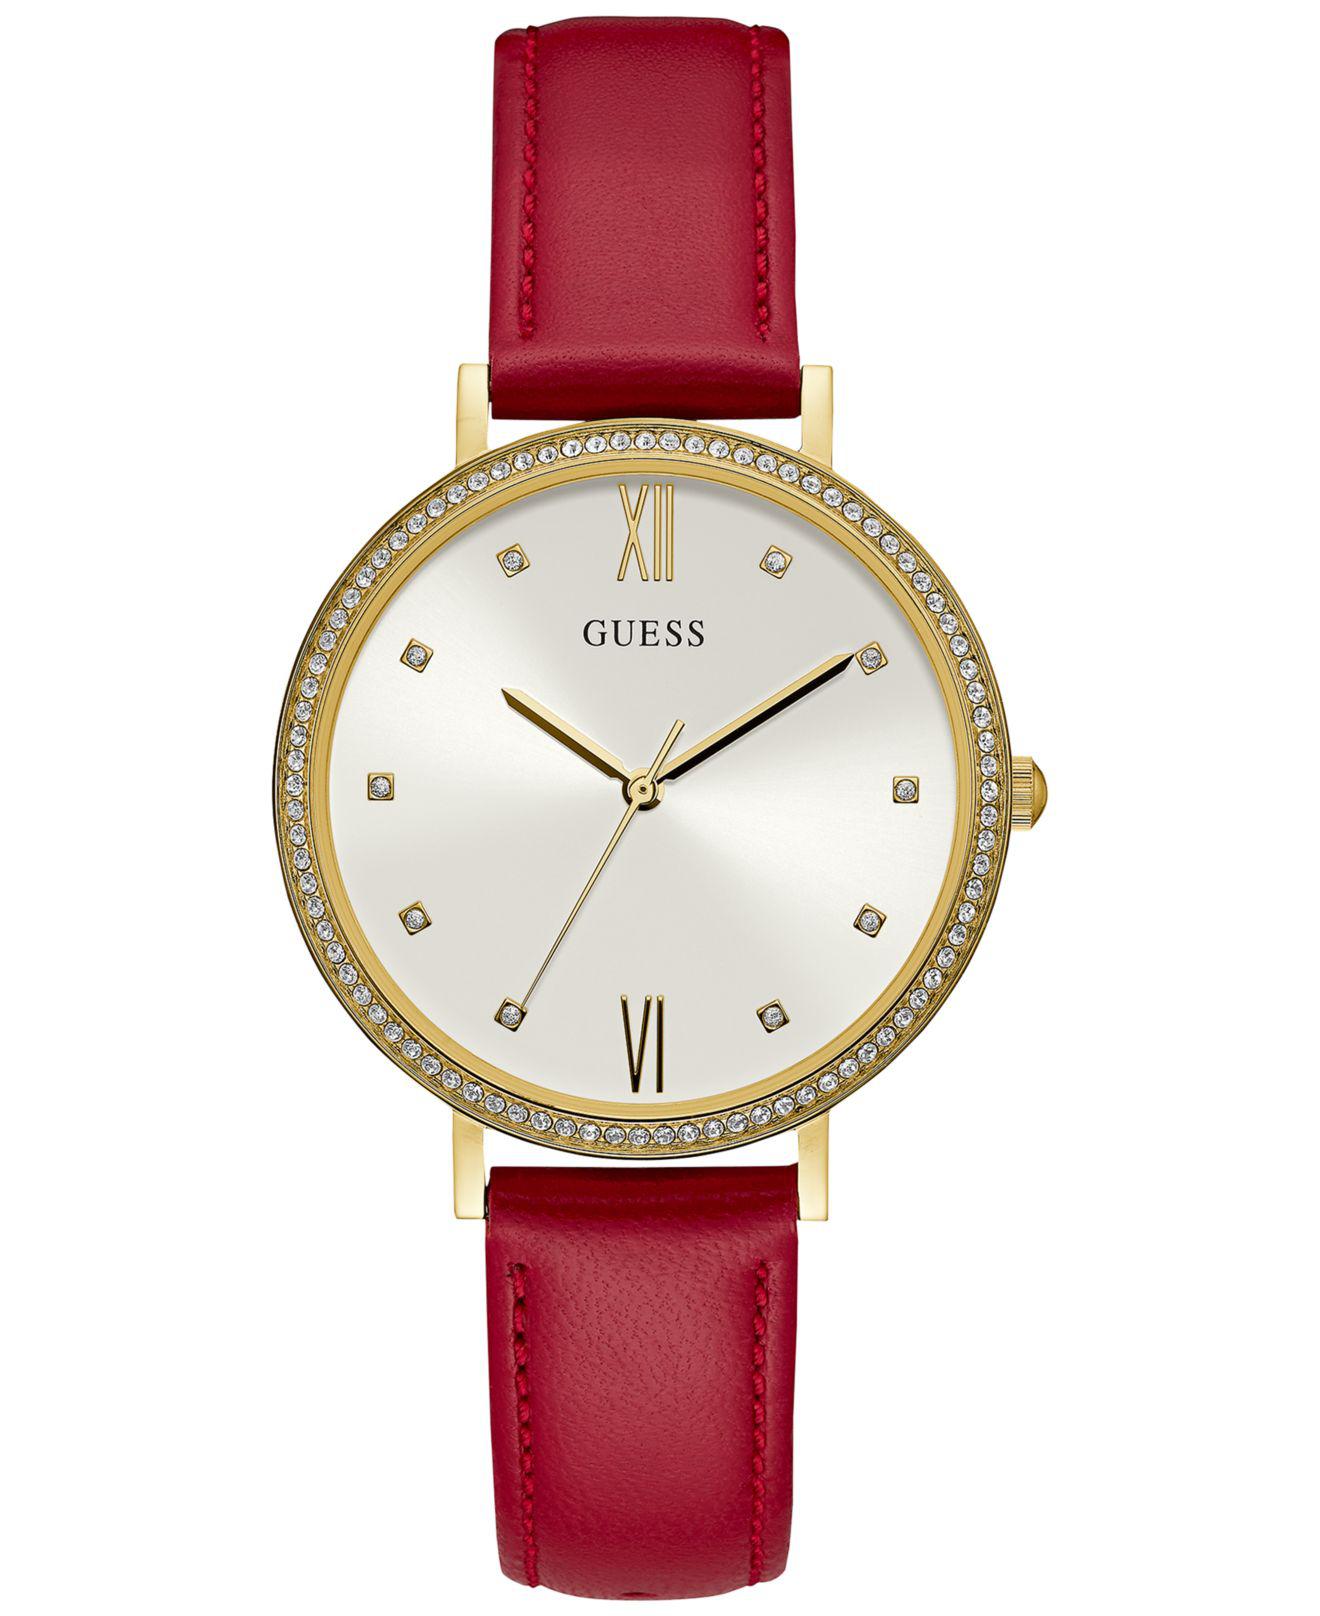 Indien Gravere Udholdenhed Guess Red Leather Strap Watch 38mm, Created For Macy's - Lyst